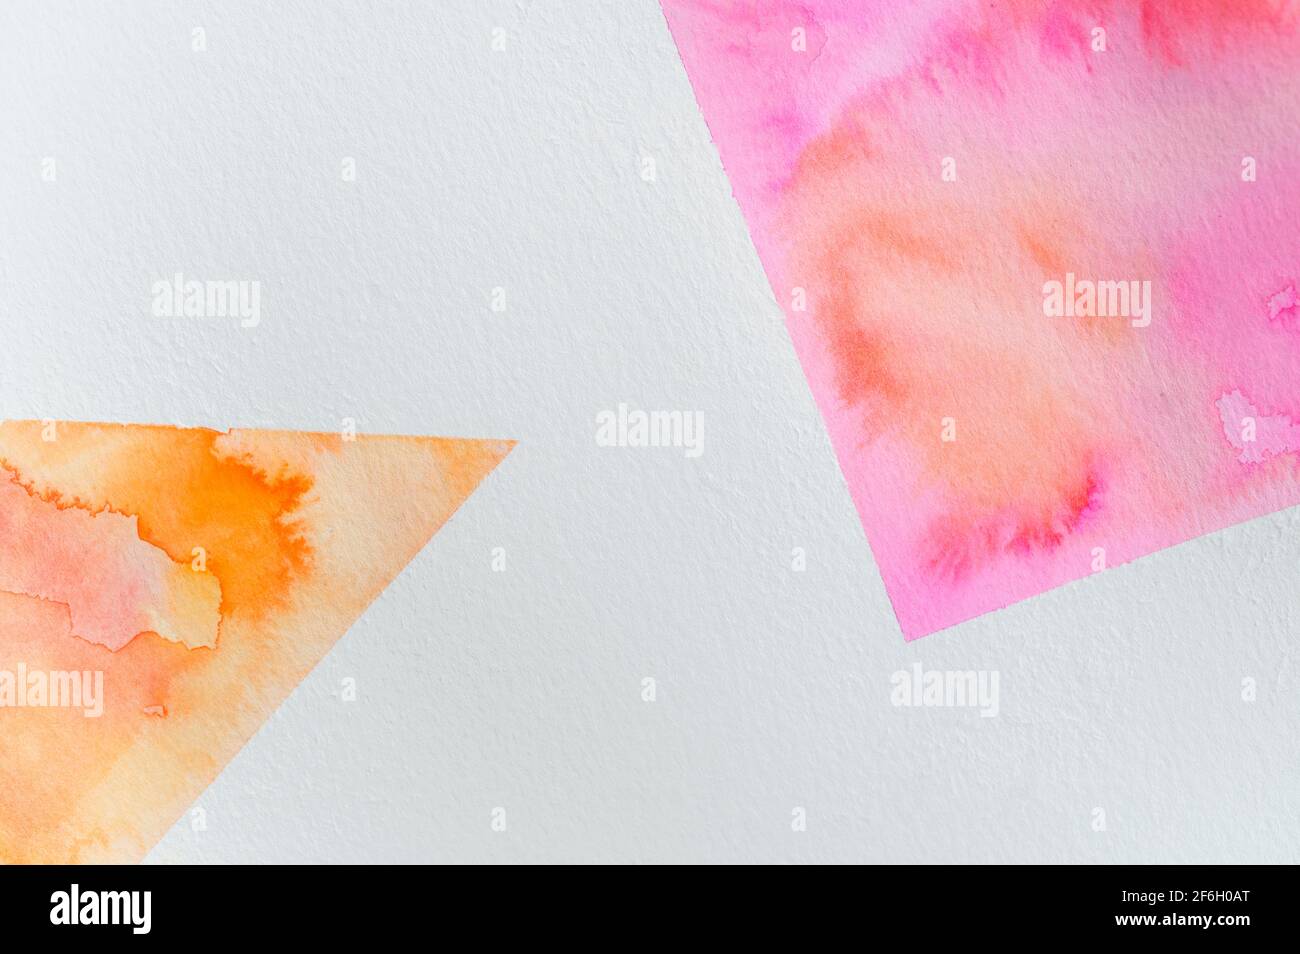 Close-up of watercolor colorful abstract shapes on white background Stock Photo